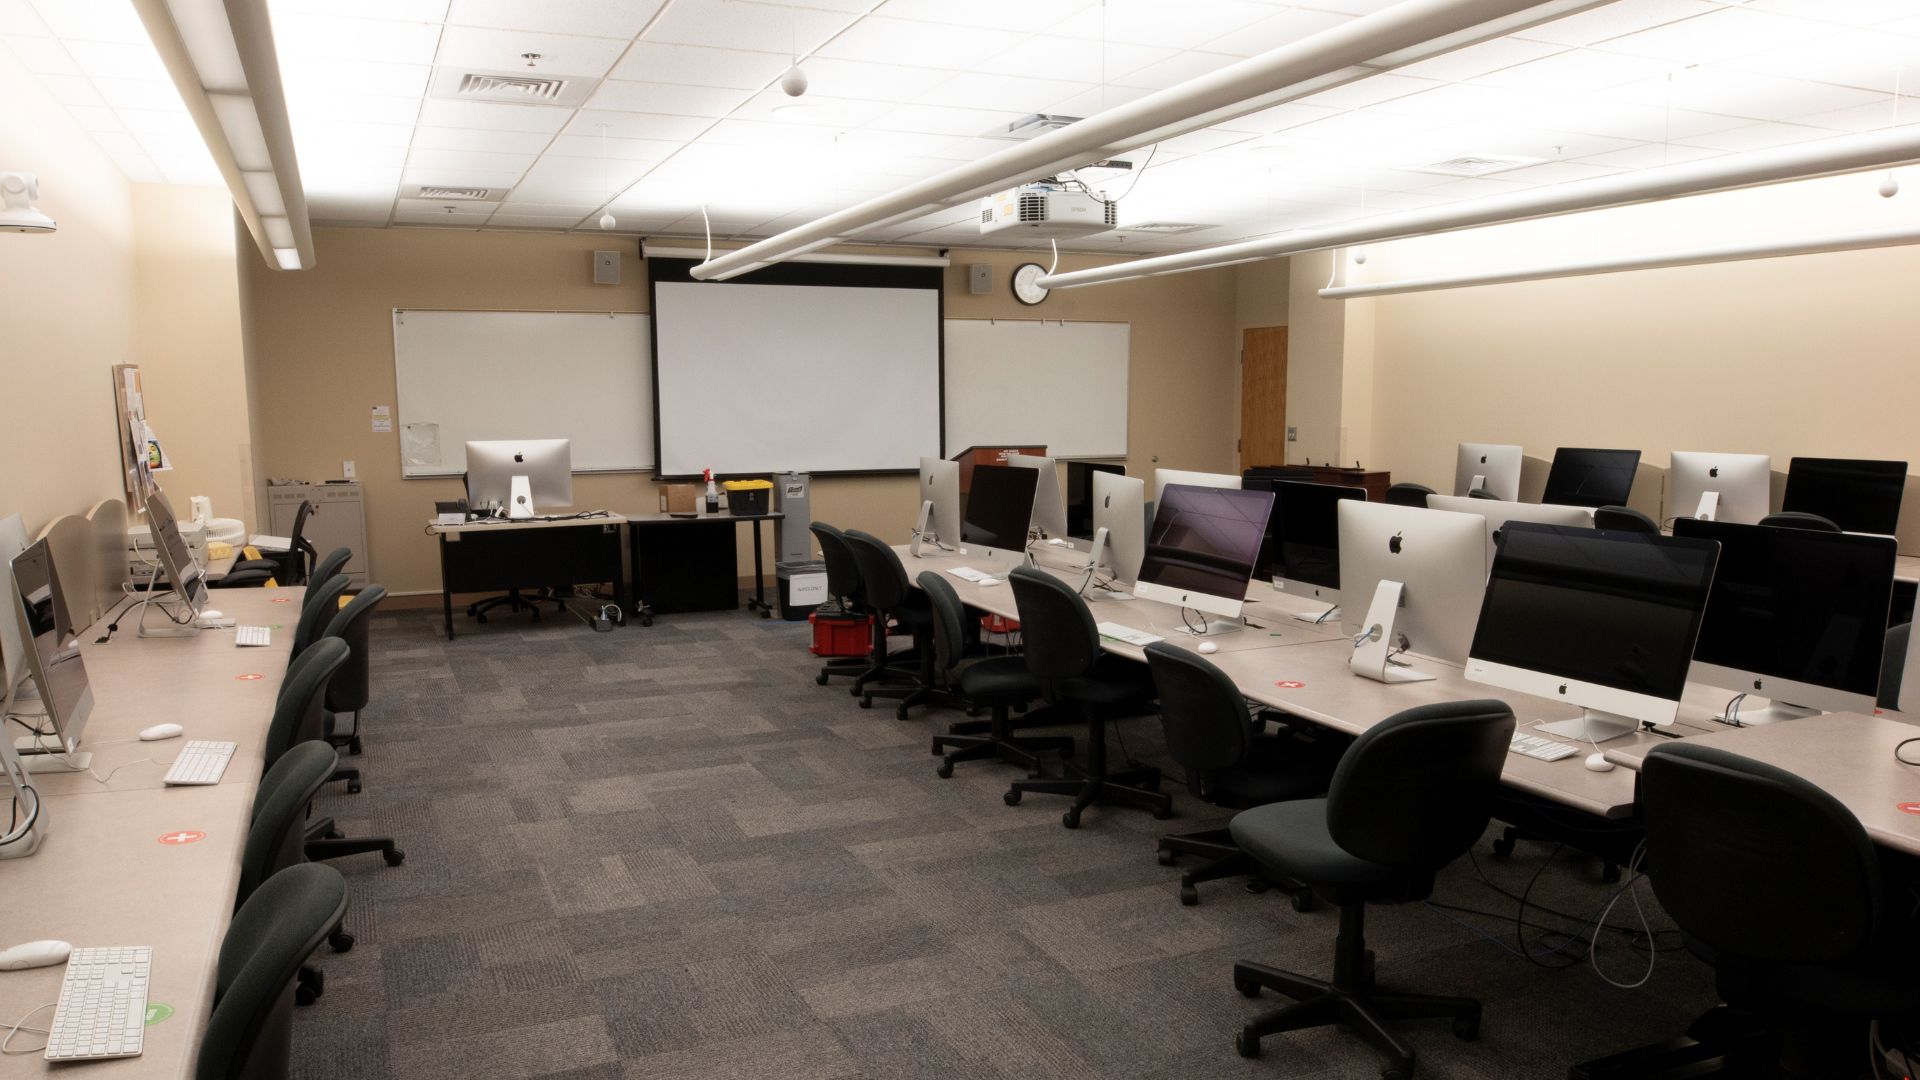 Room with desks, chairs, and Mac workstations